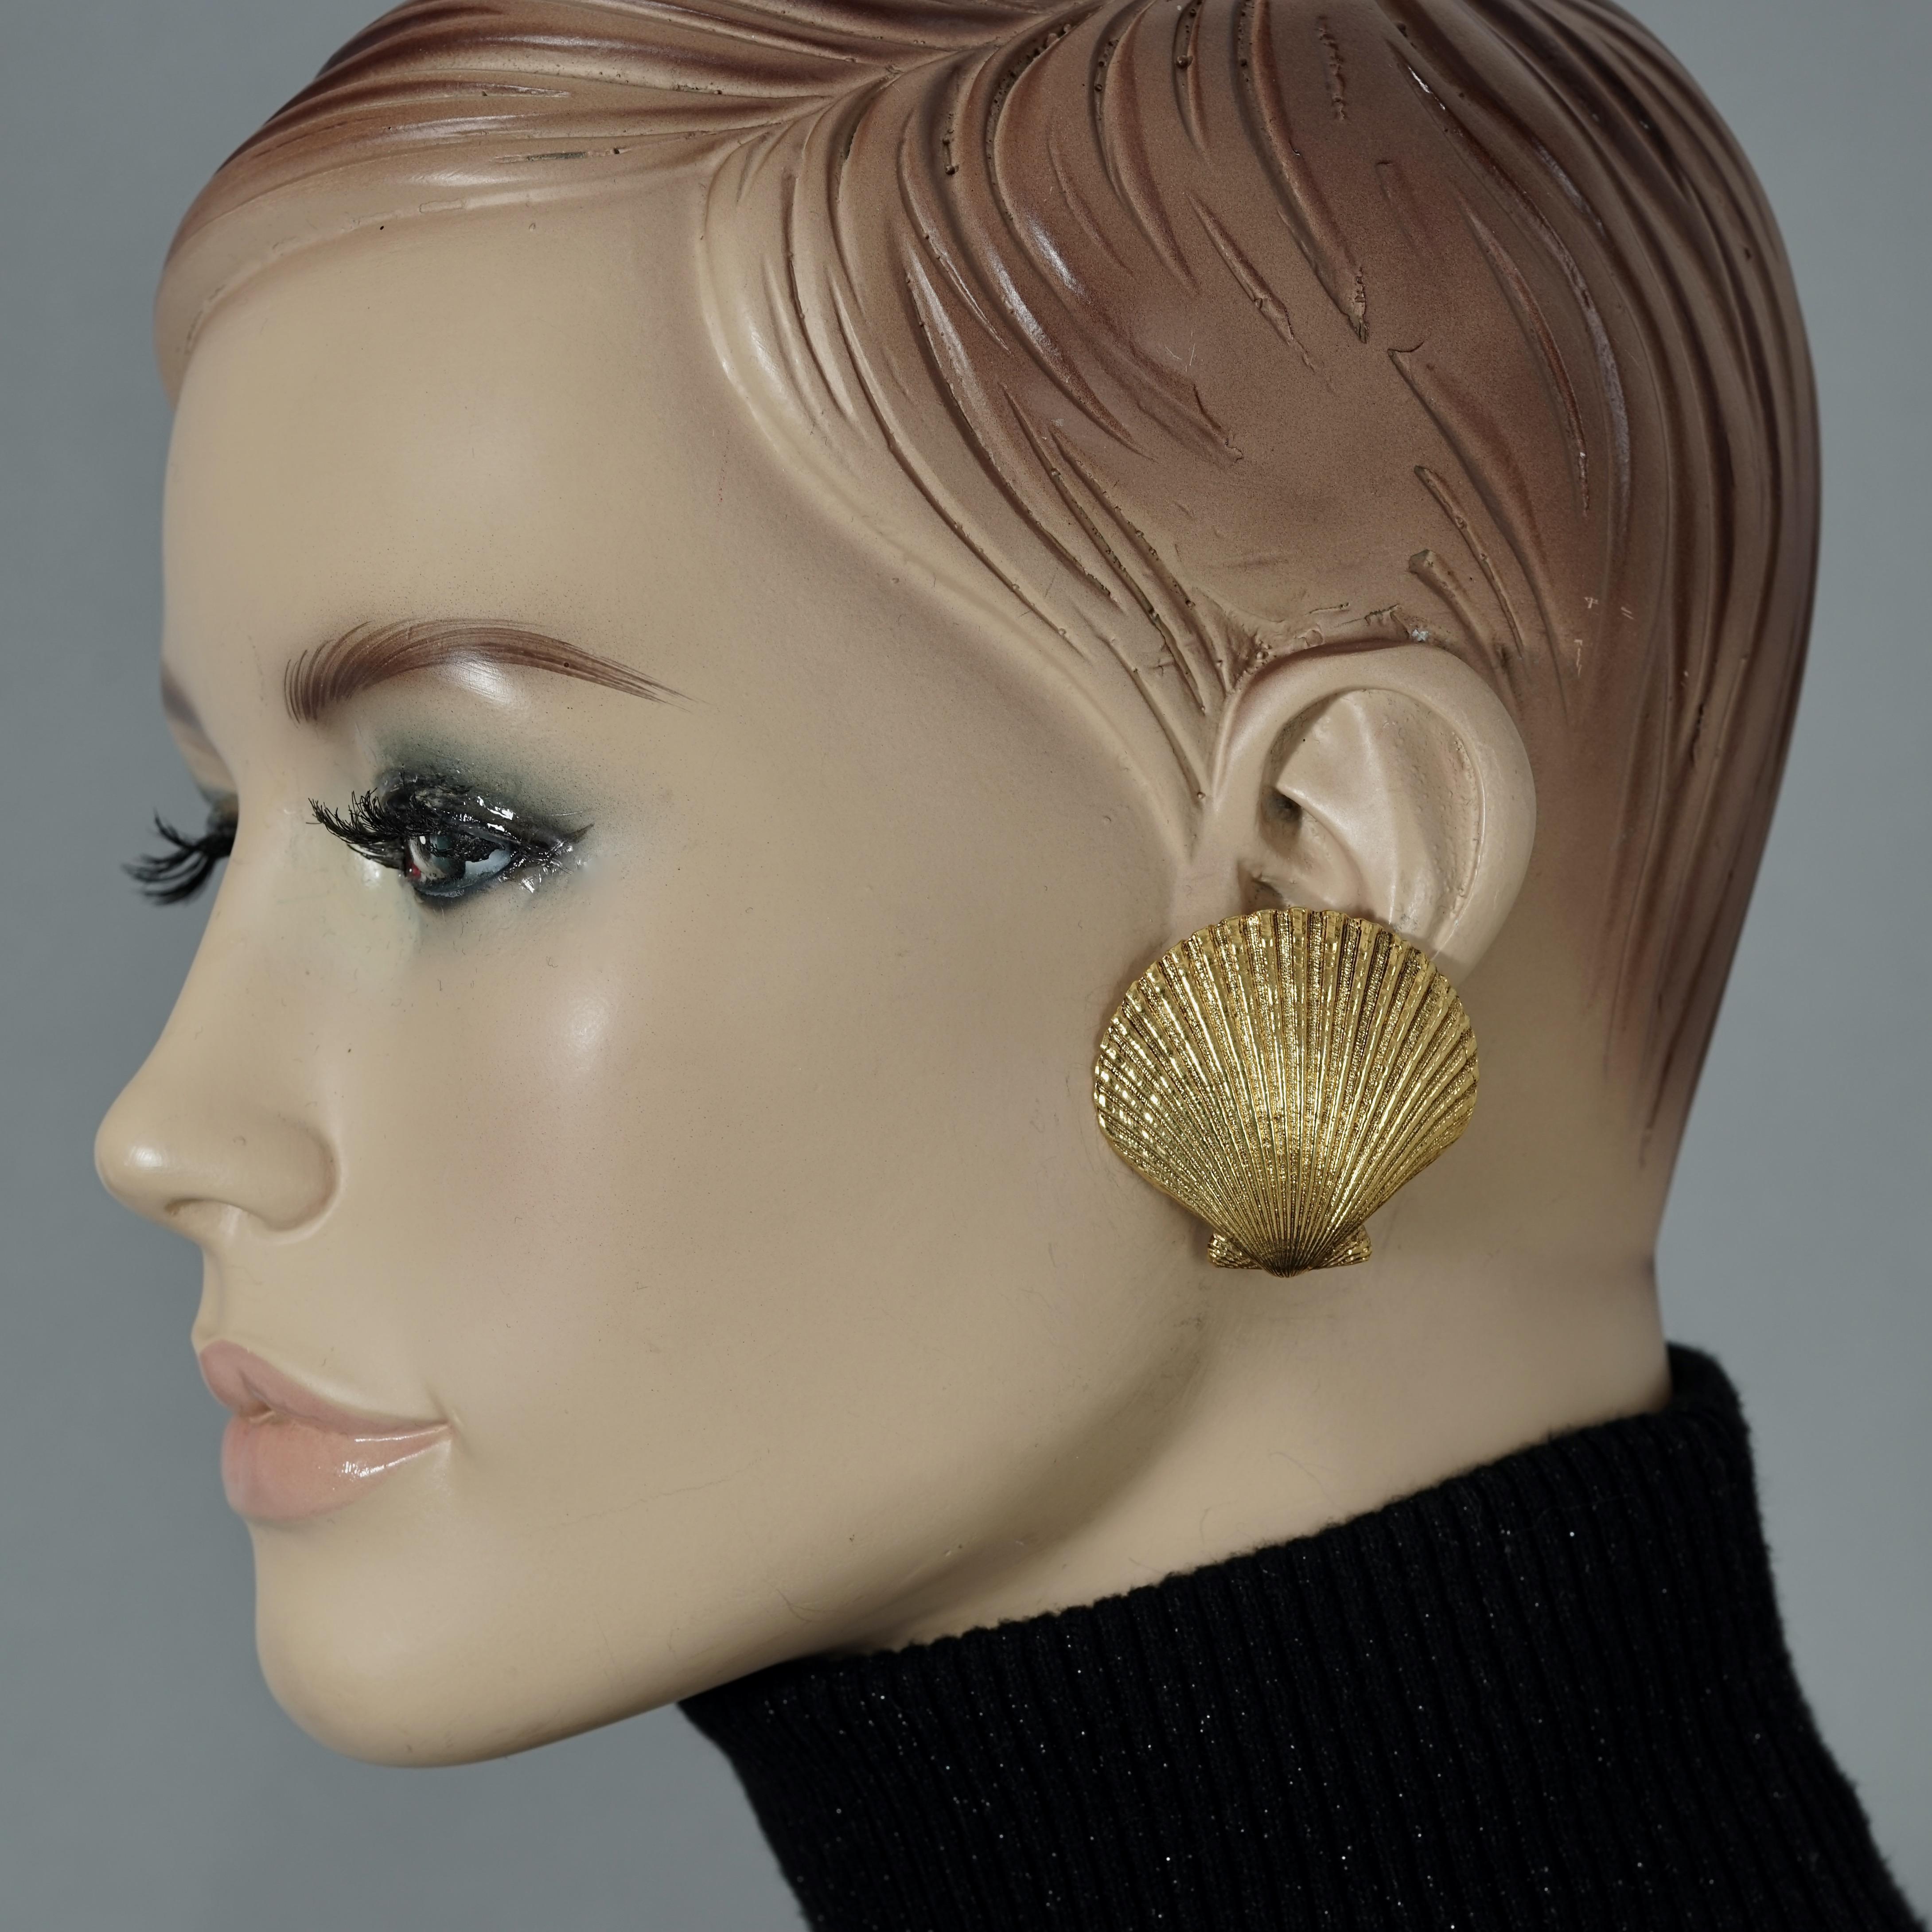 Vintage YVES SAINT LAURENT Ysl Clam Shell Earrings

Measurements:
Height: 1.57 inches (4 cm)
Width: 1.57 inches (4 cm)
Weight per Earring: 13 grams

Features:
- 100% Authentic YVES SAINT LAURENT.
- Textured clam shell shape earrings.
- Gold tone.
-